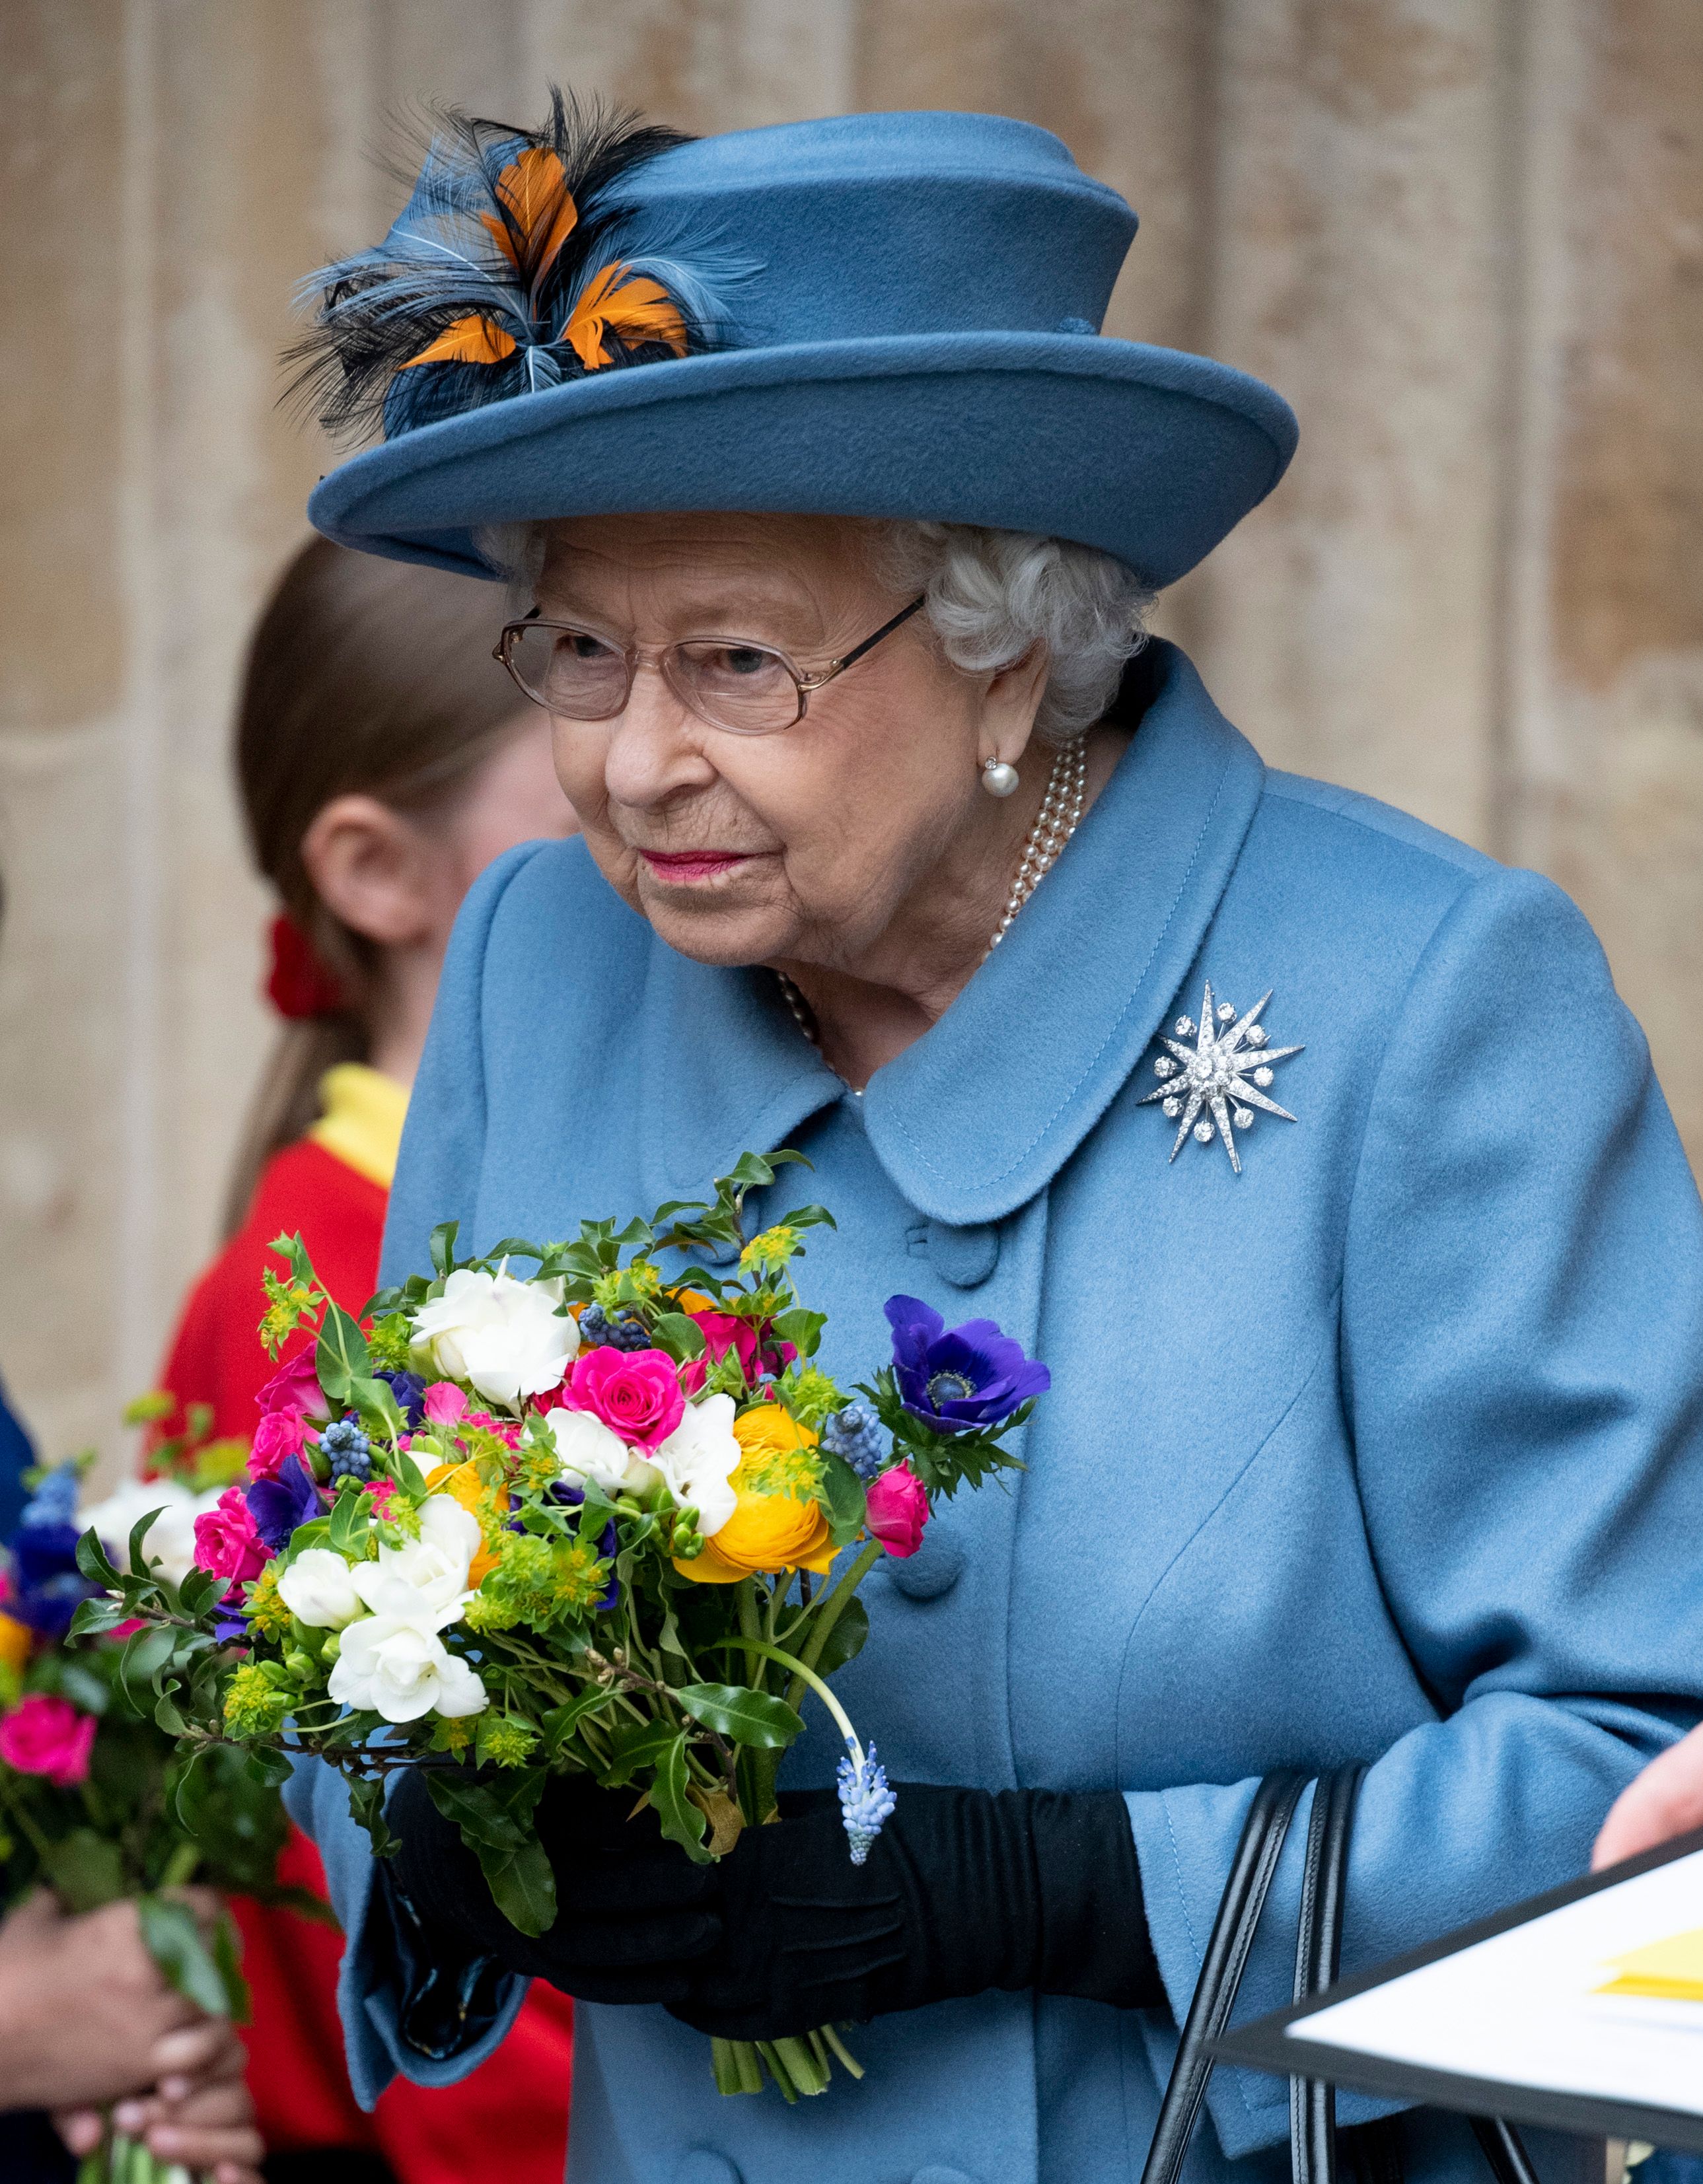  Queen Elizabeth II at the Commonwealth Day Service 2020 at Westminster Abbey on March 9, 2020. | Source: Getty Images. 